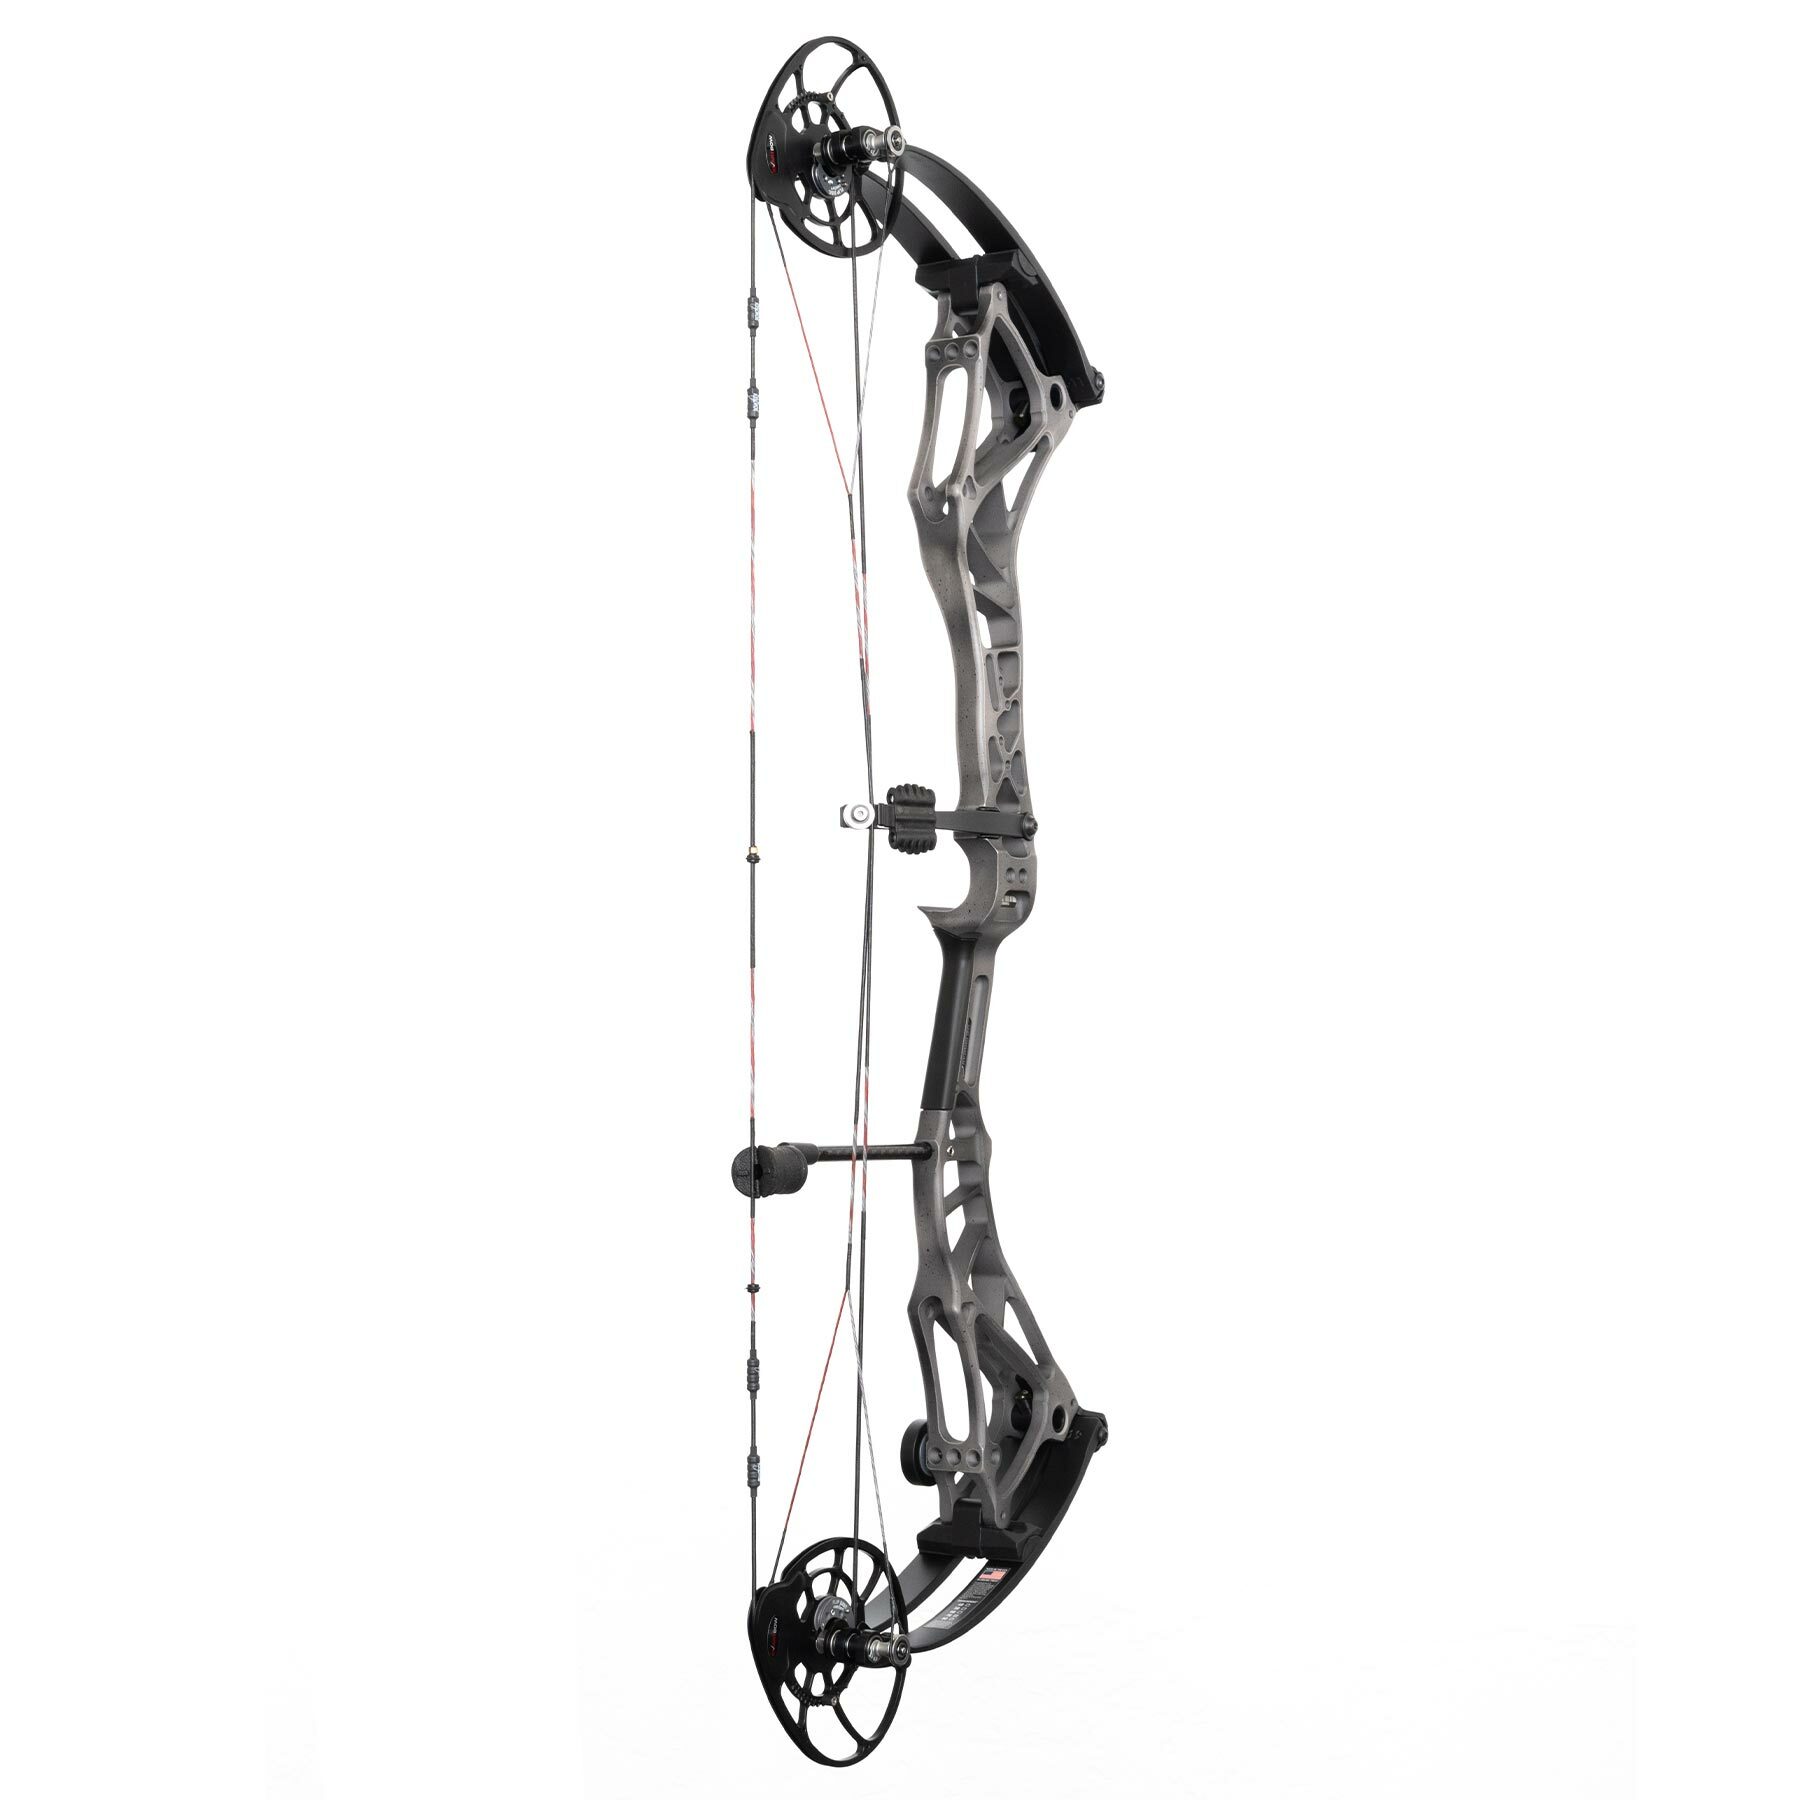 genesis compound bow by serial number lookup